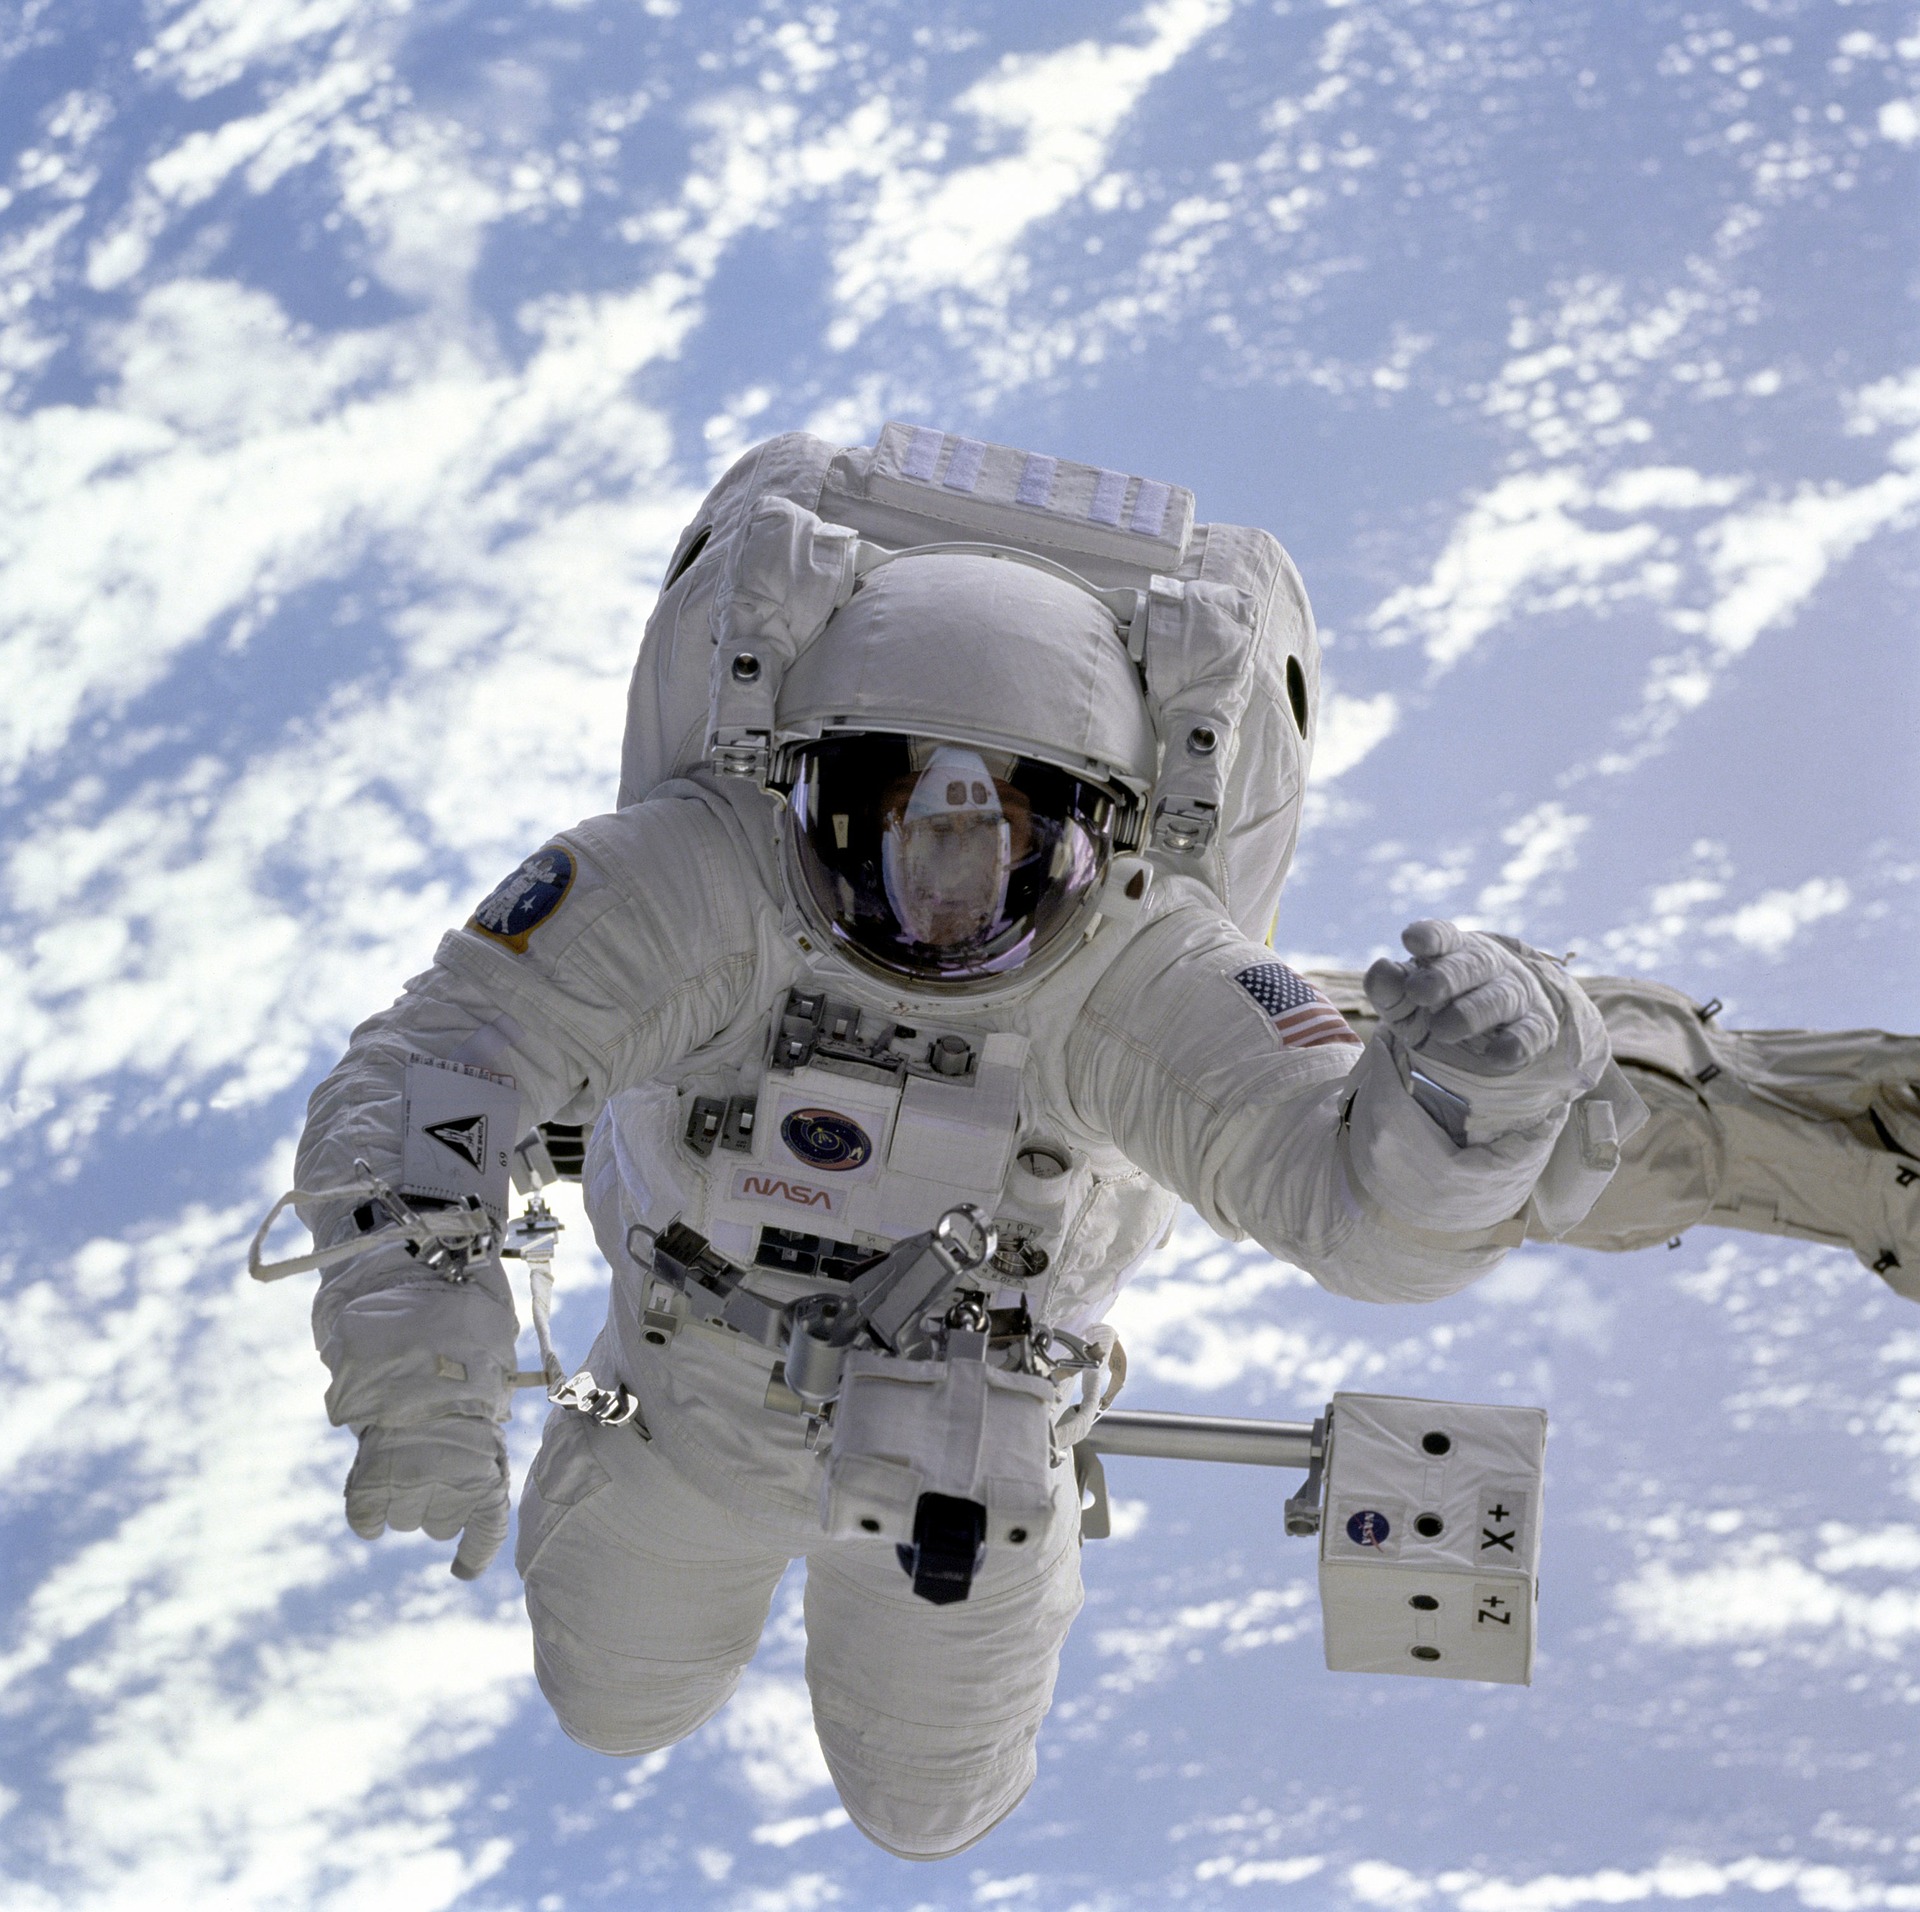 Astronaut hovering in space